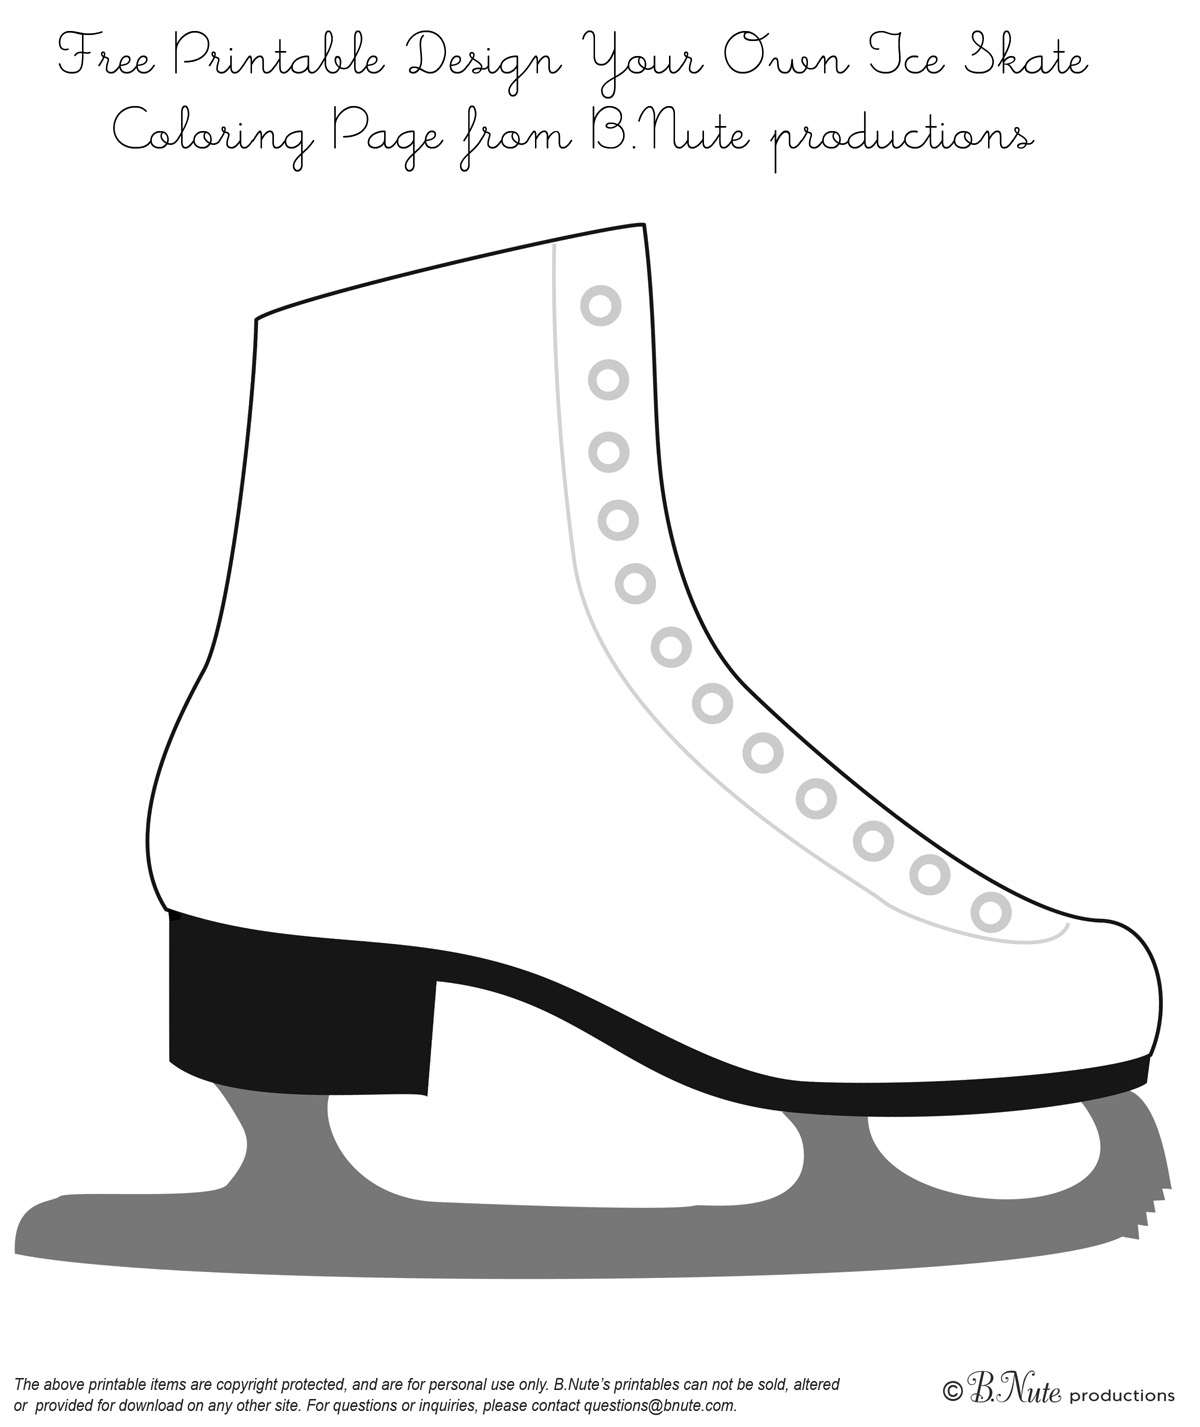 bnute productions Free Printable Coloring Page Design Your Own Ice Skate